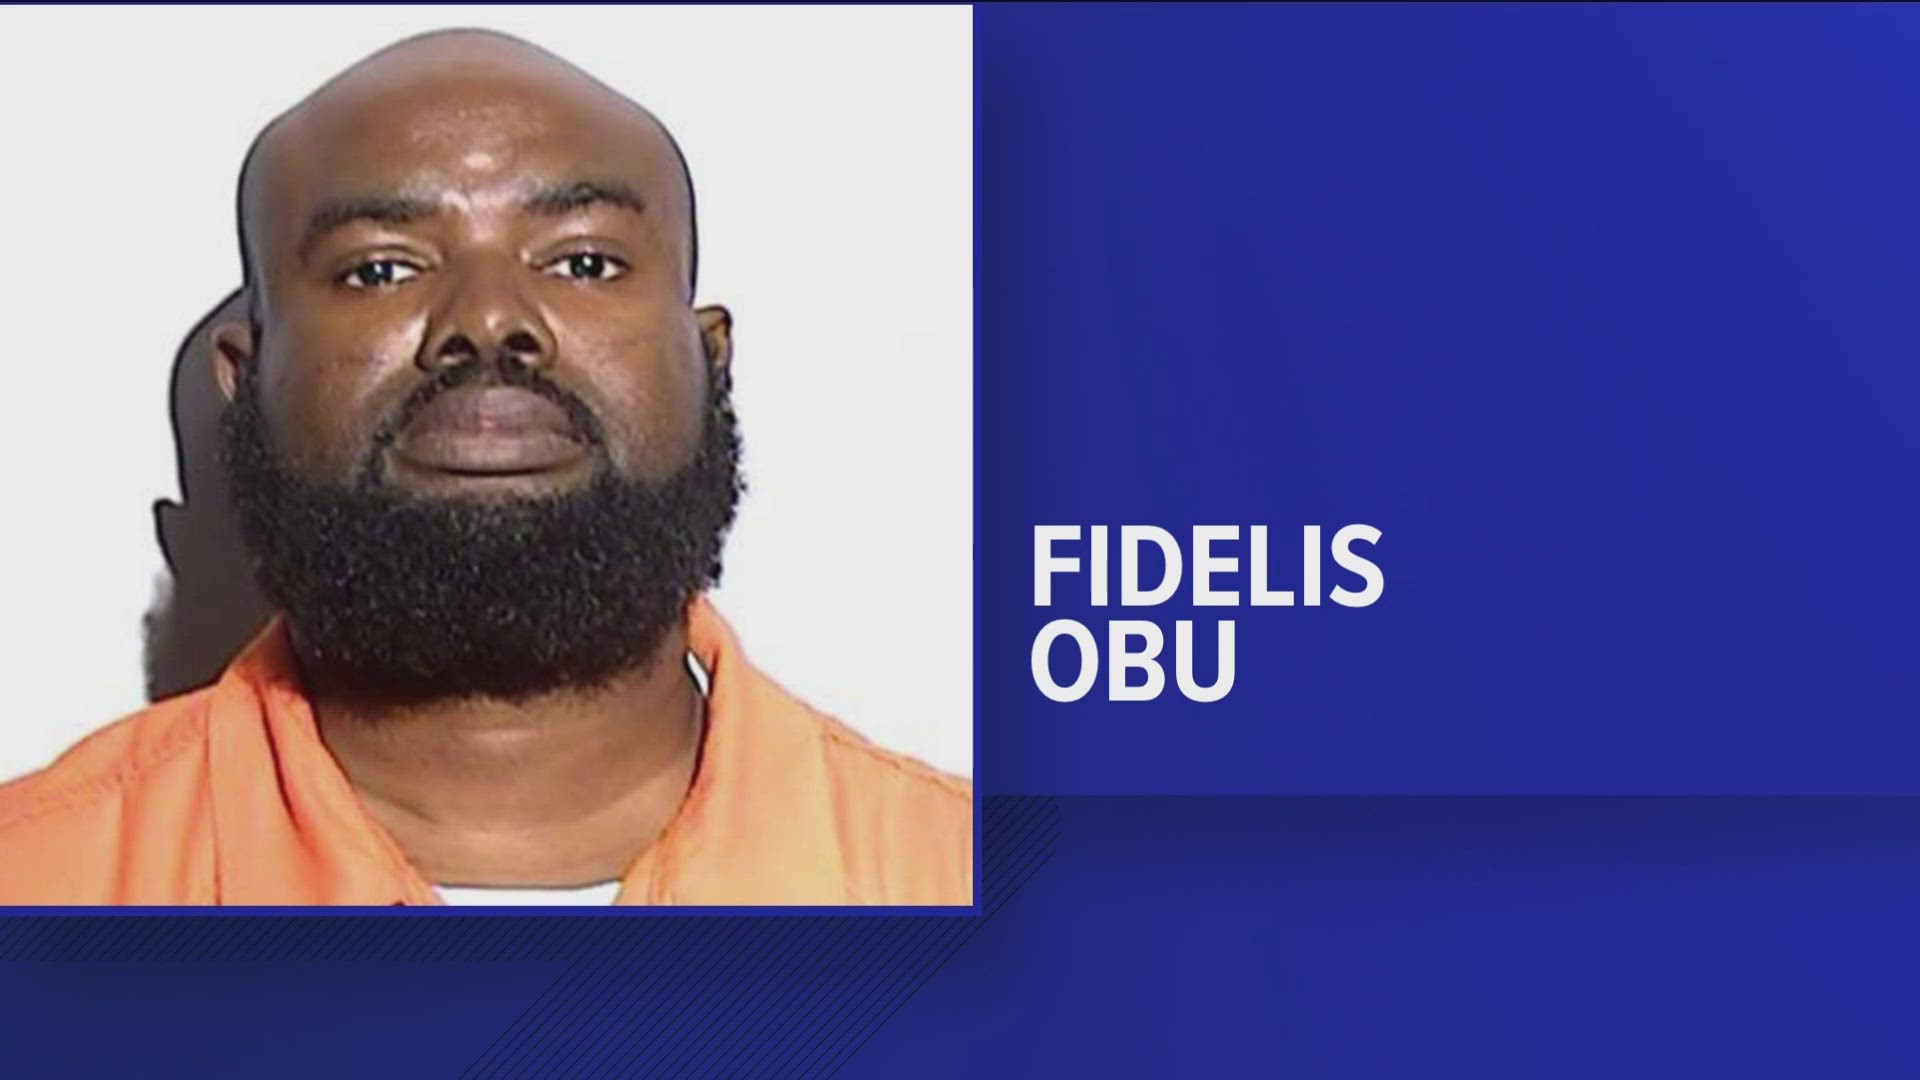 Fidelis Obu, the chief medical officer at the Neighborhood Health Association is accused of the crimes that allegedly happened in October 2019.